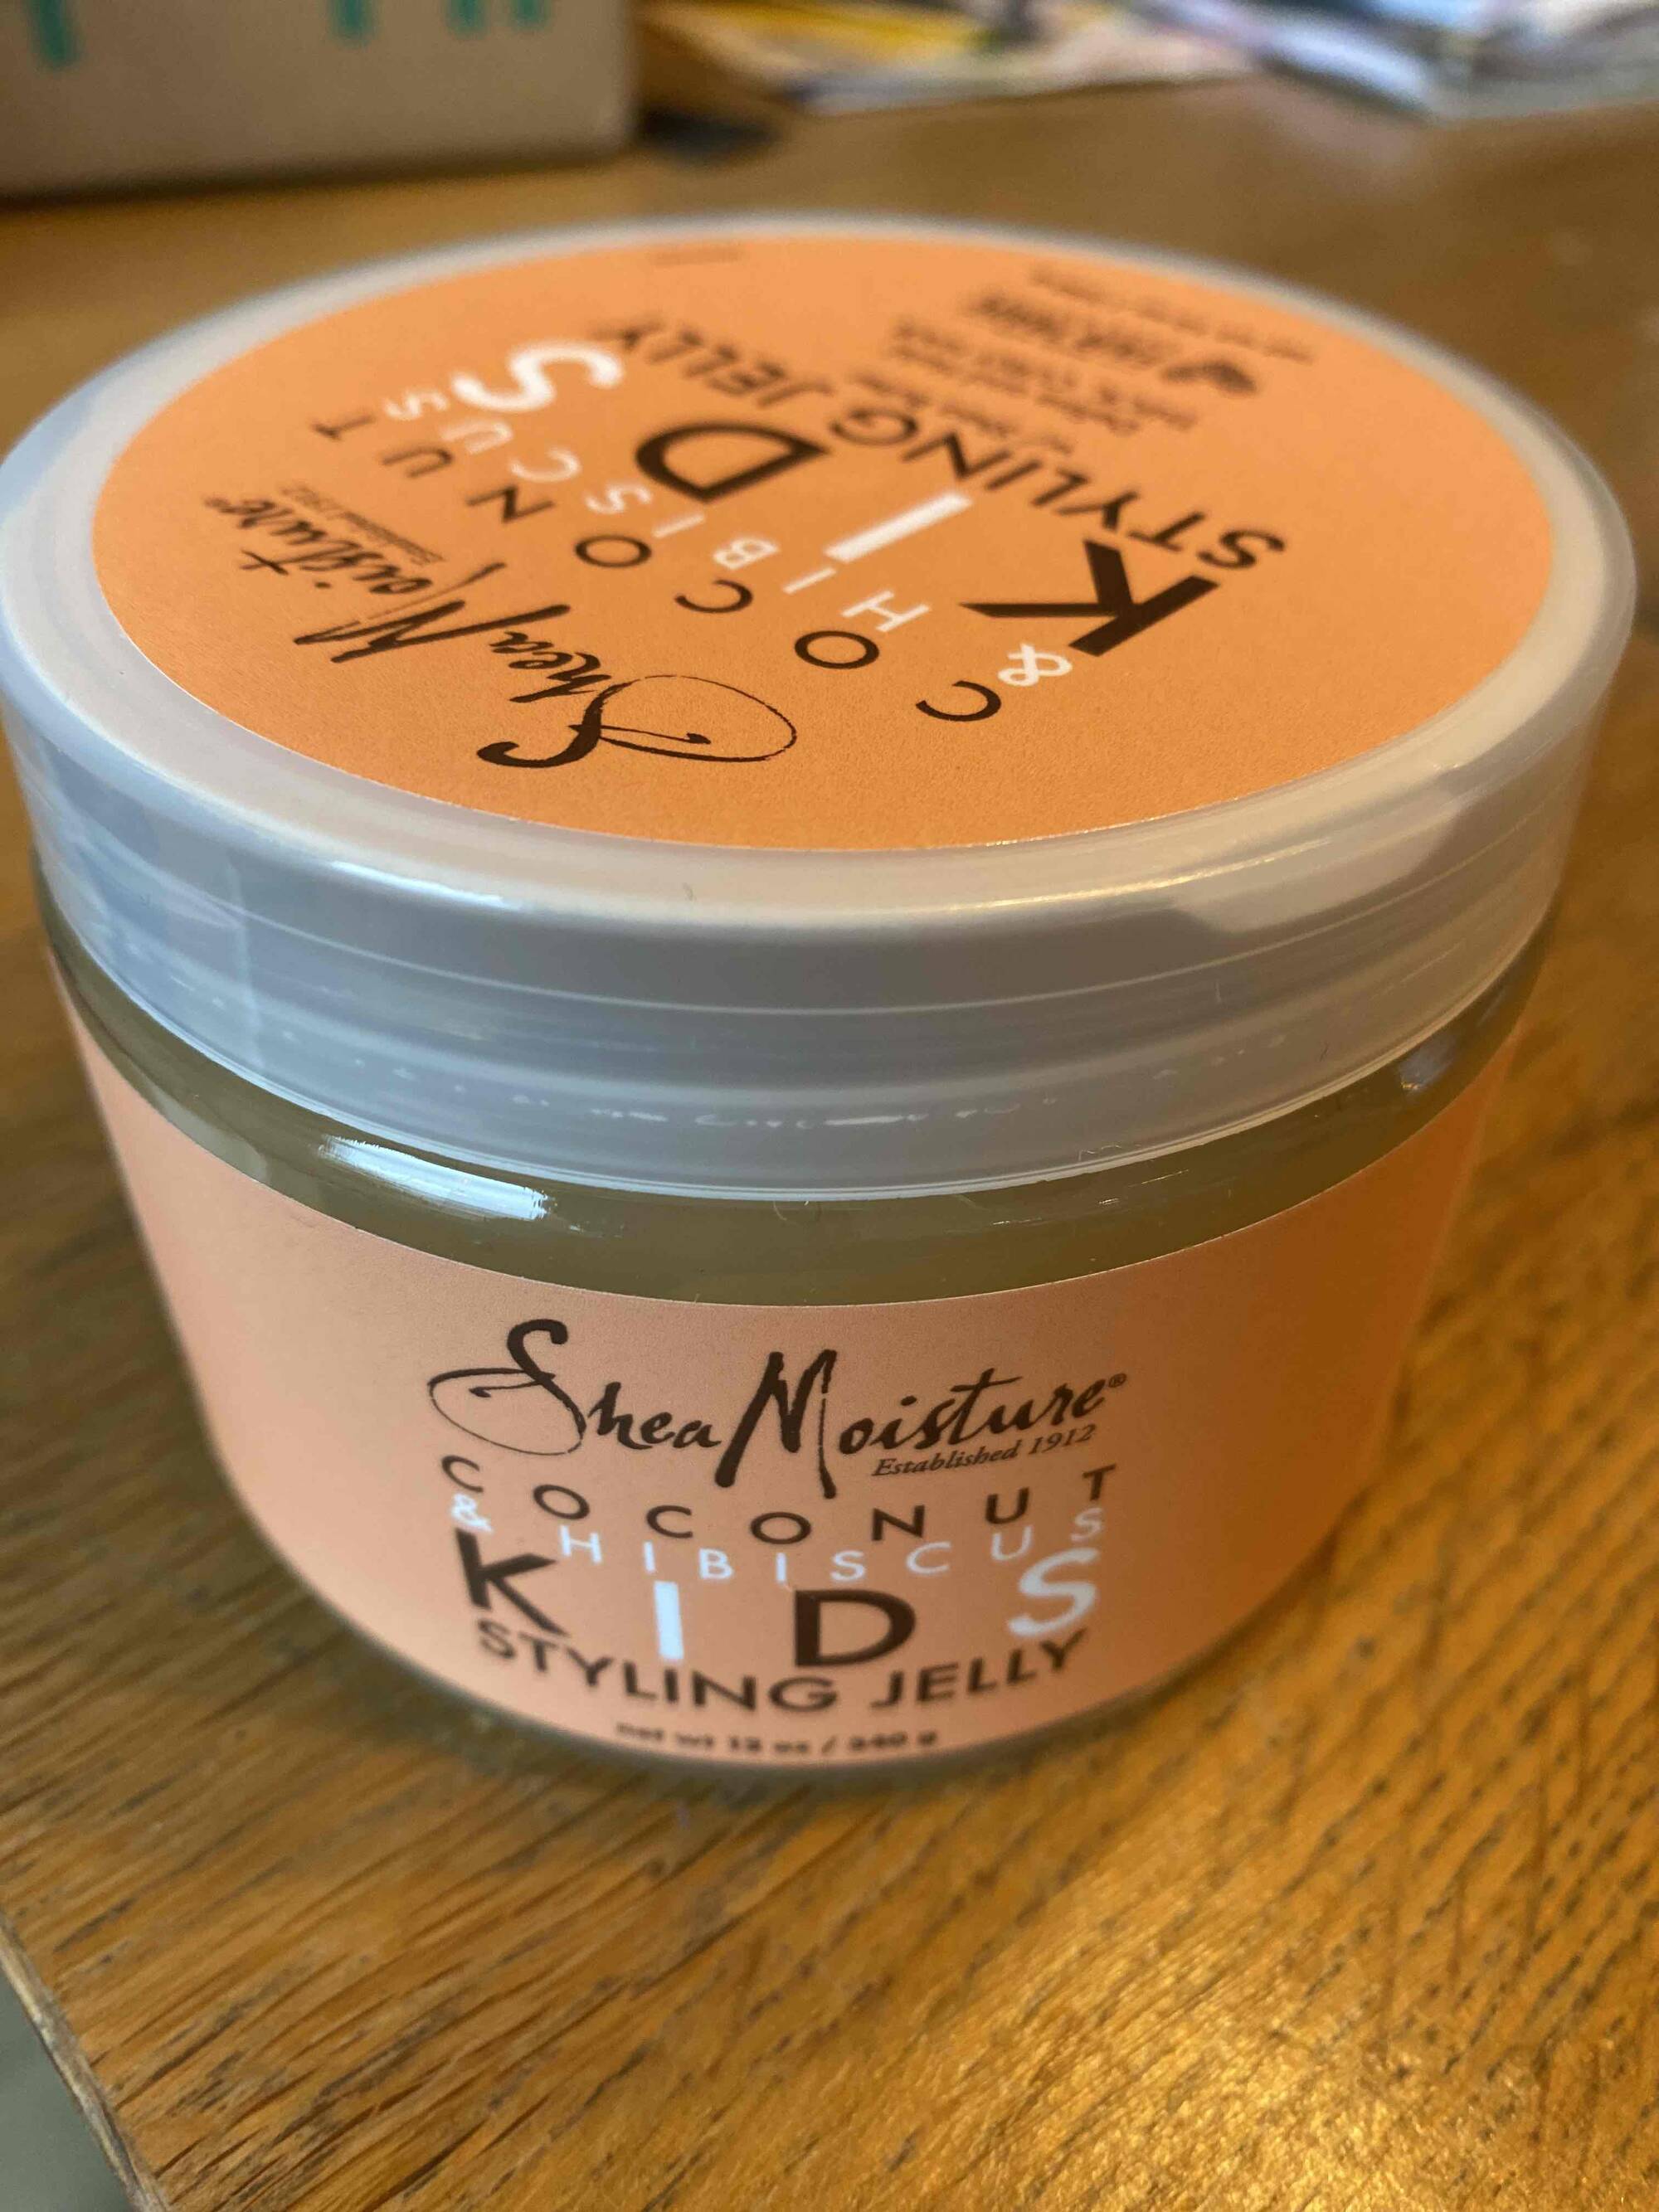 SHEA MOISTURE - Coconut & hibiscus - Kids styling jelly 